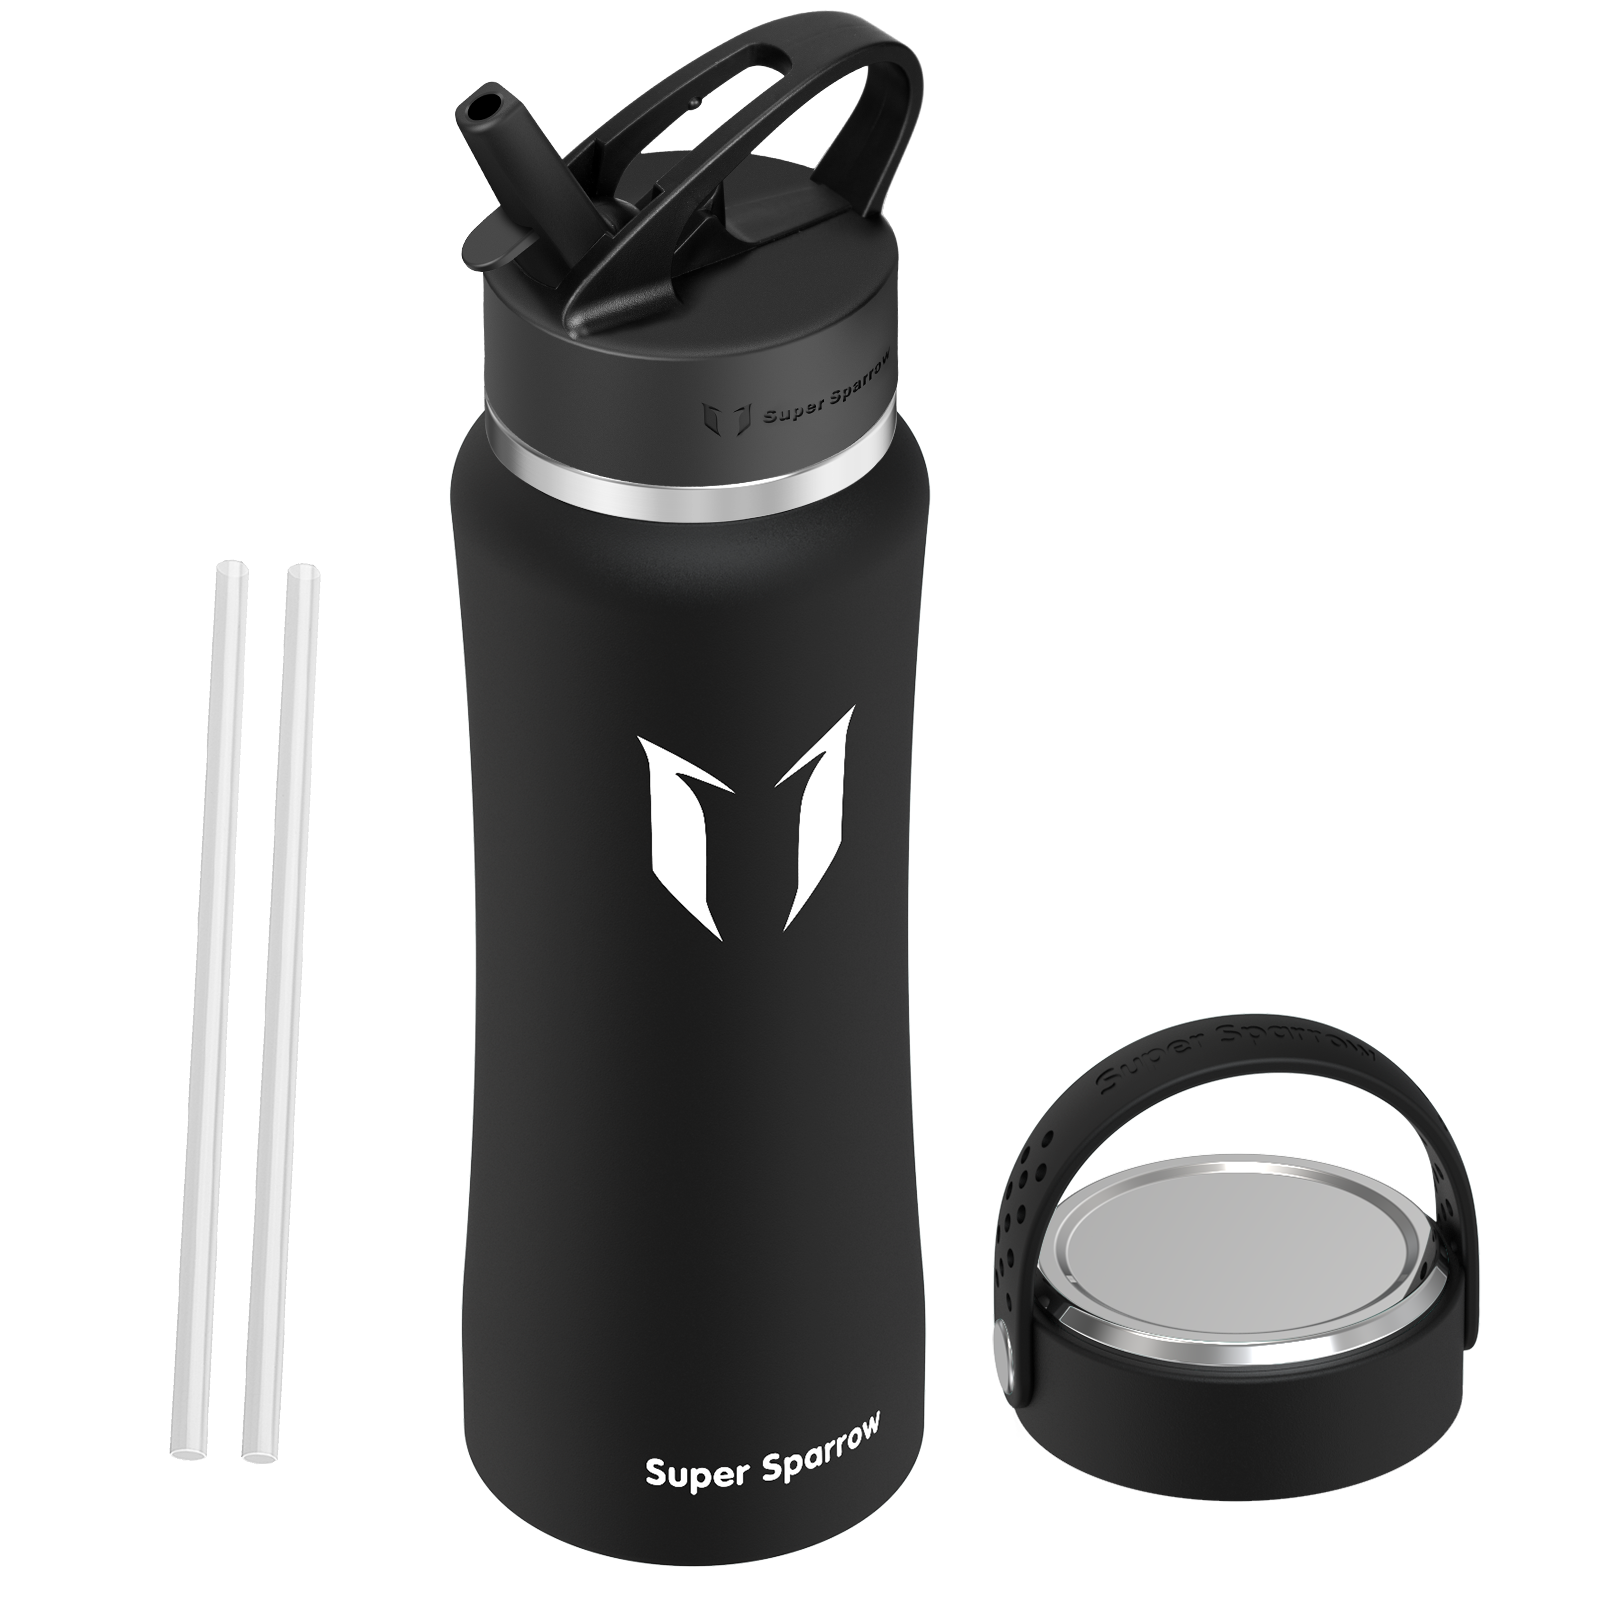 Wide Mouth Stainless Steel Water Bottle with Straw Lid, 32OZ / 1000ML